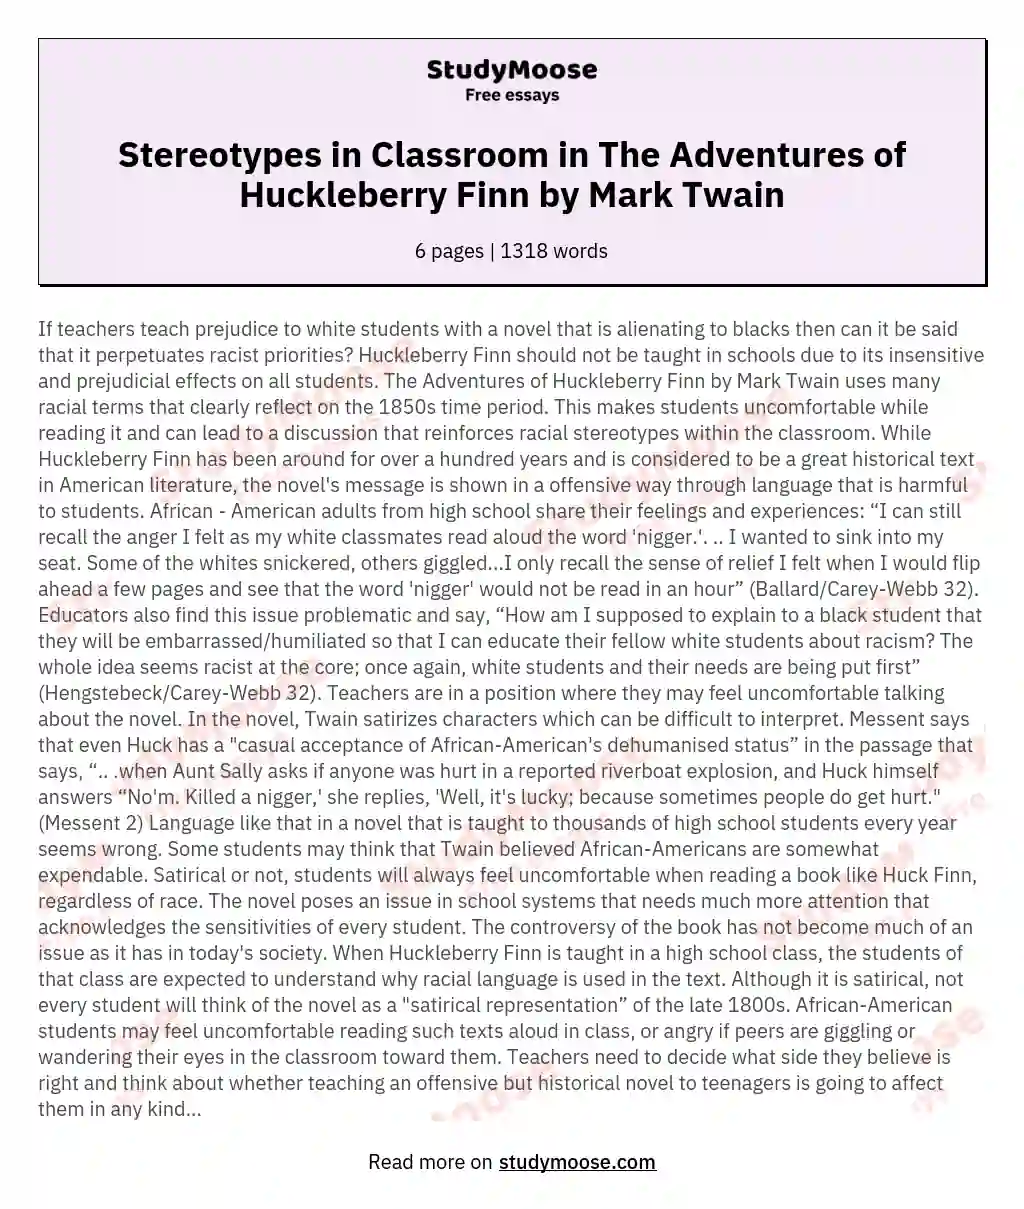 Racial Stereotypes Within the Classroom in The Adventures of Huckleberry Finn by Mark Twain